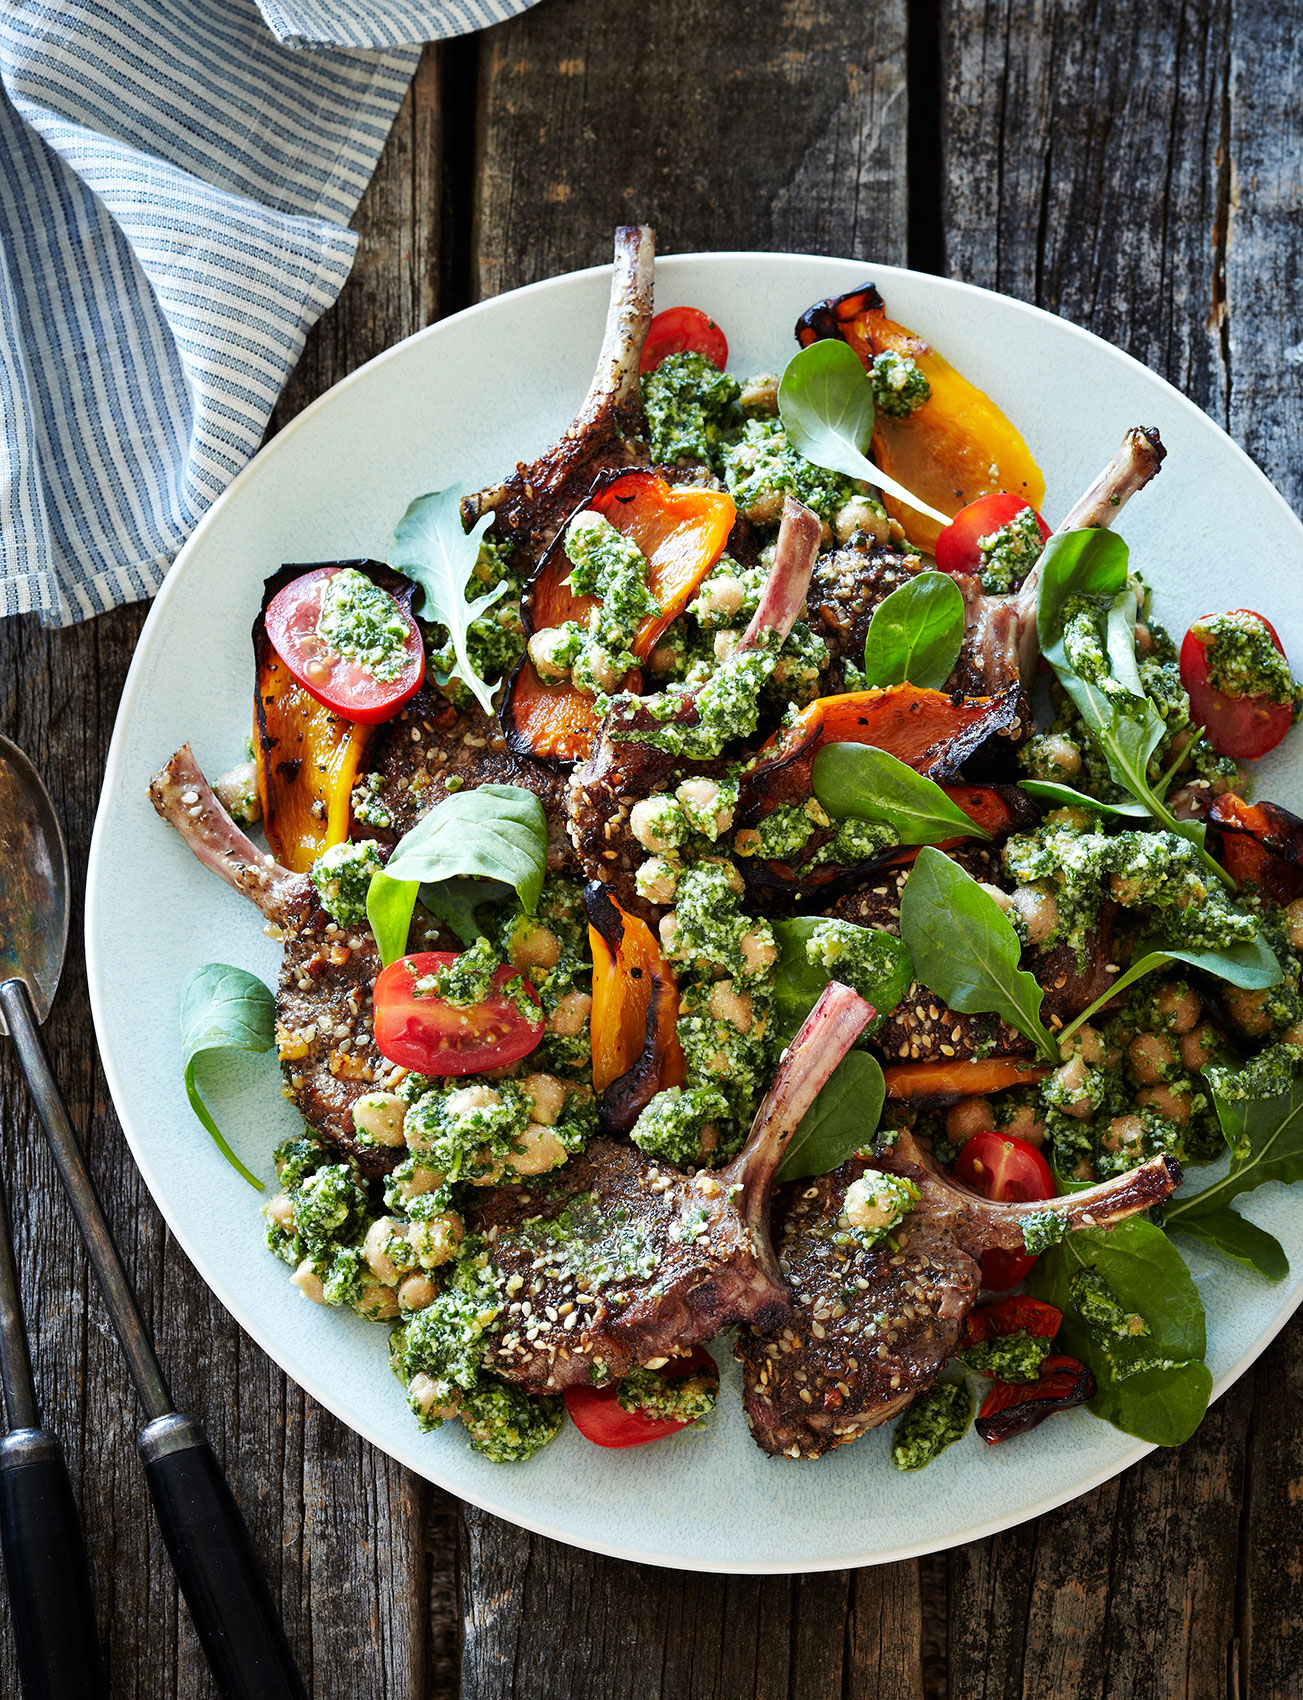 Simple Salads • Lamb Chop & Chic Pea Salad with Grilled Capsicum • Cookbook & Editorial Food Photography